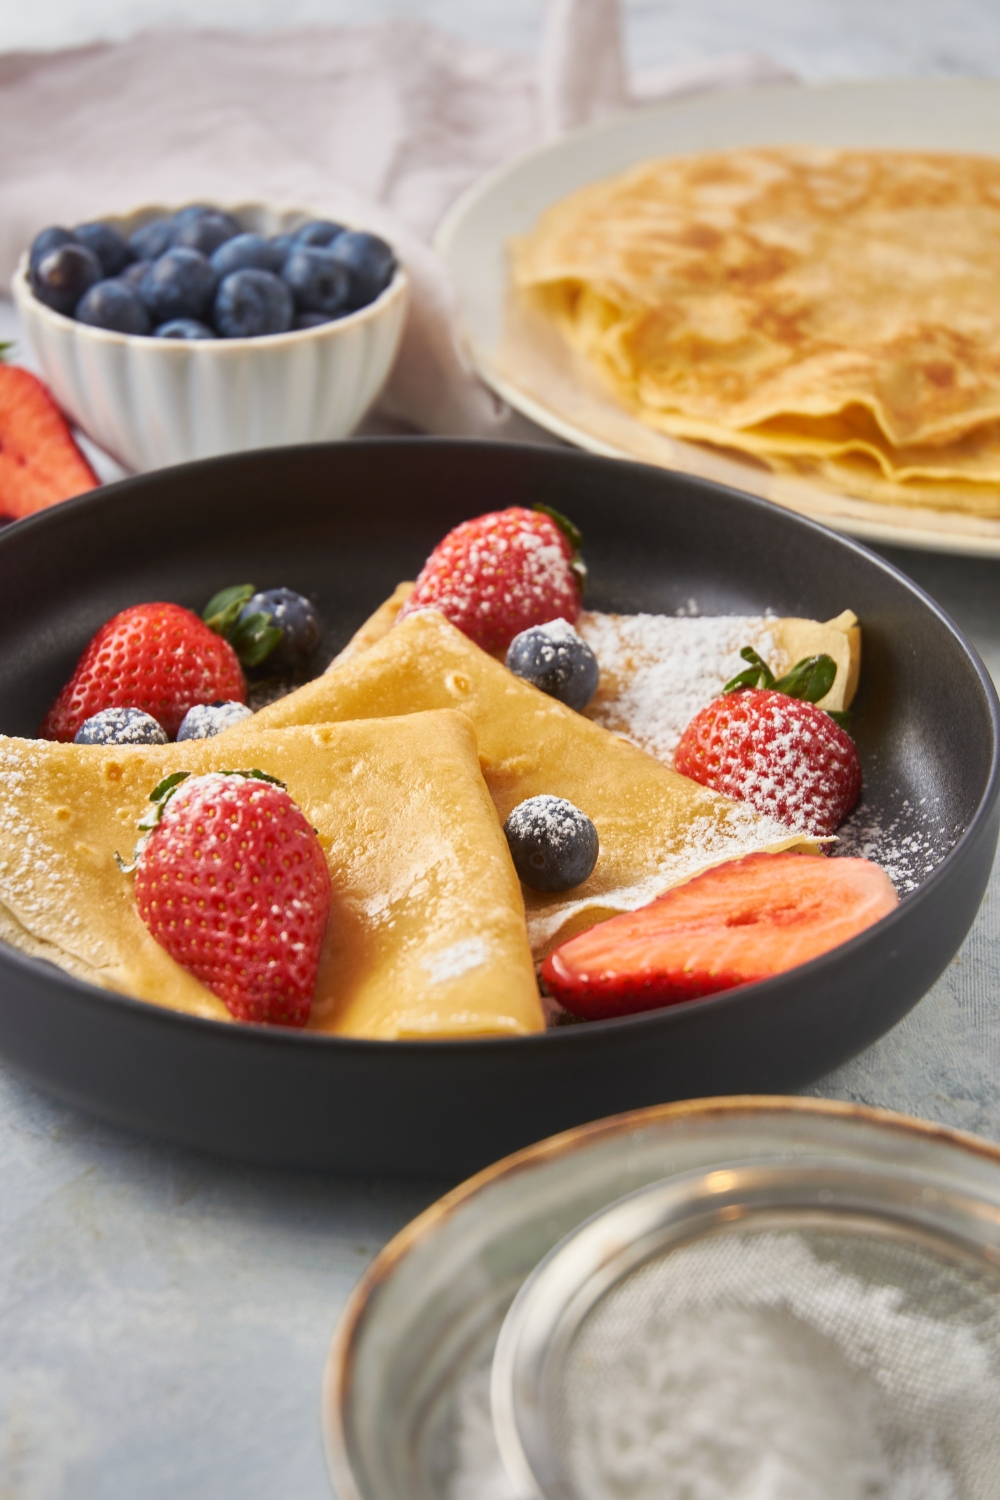 Three crepes layered on top of each other, dusted with powdered sugar and topped with fresh blueberries and halved strawberries.